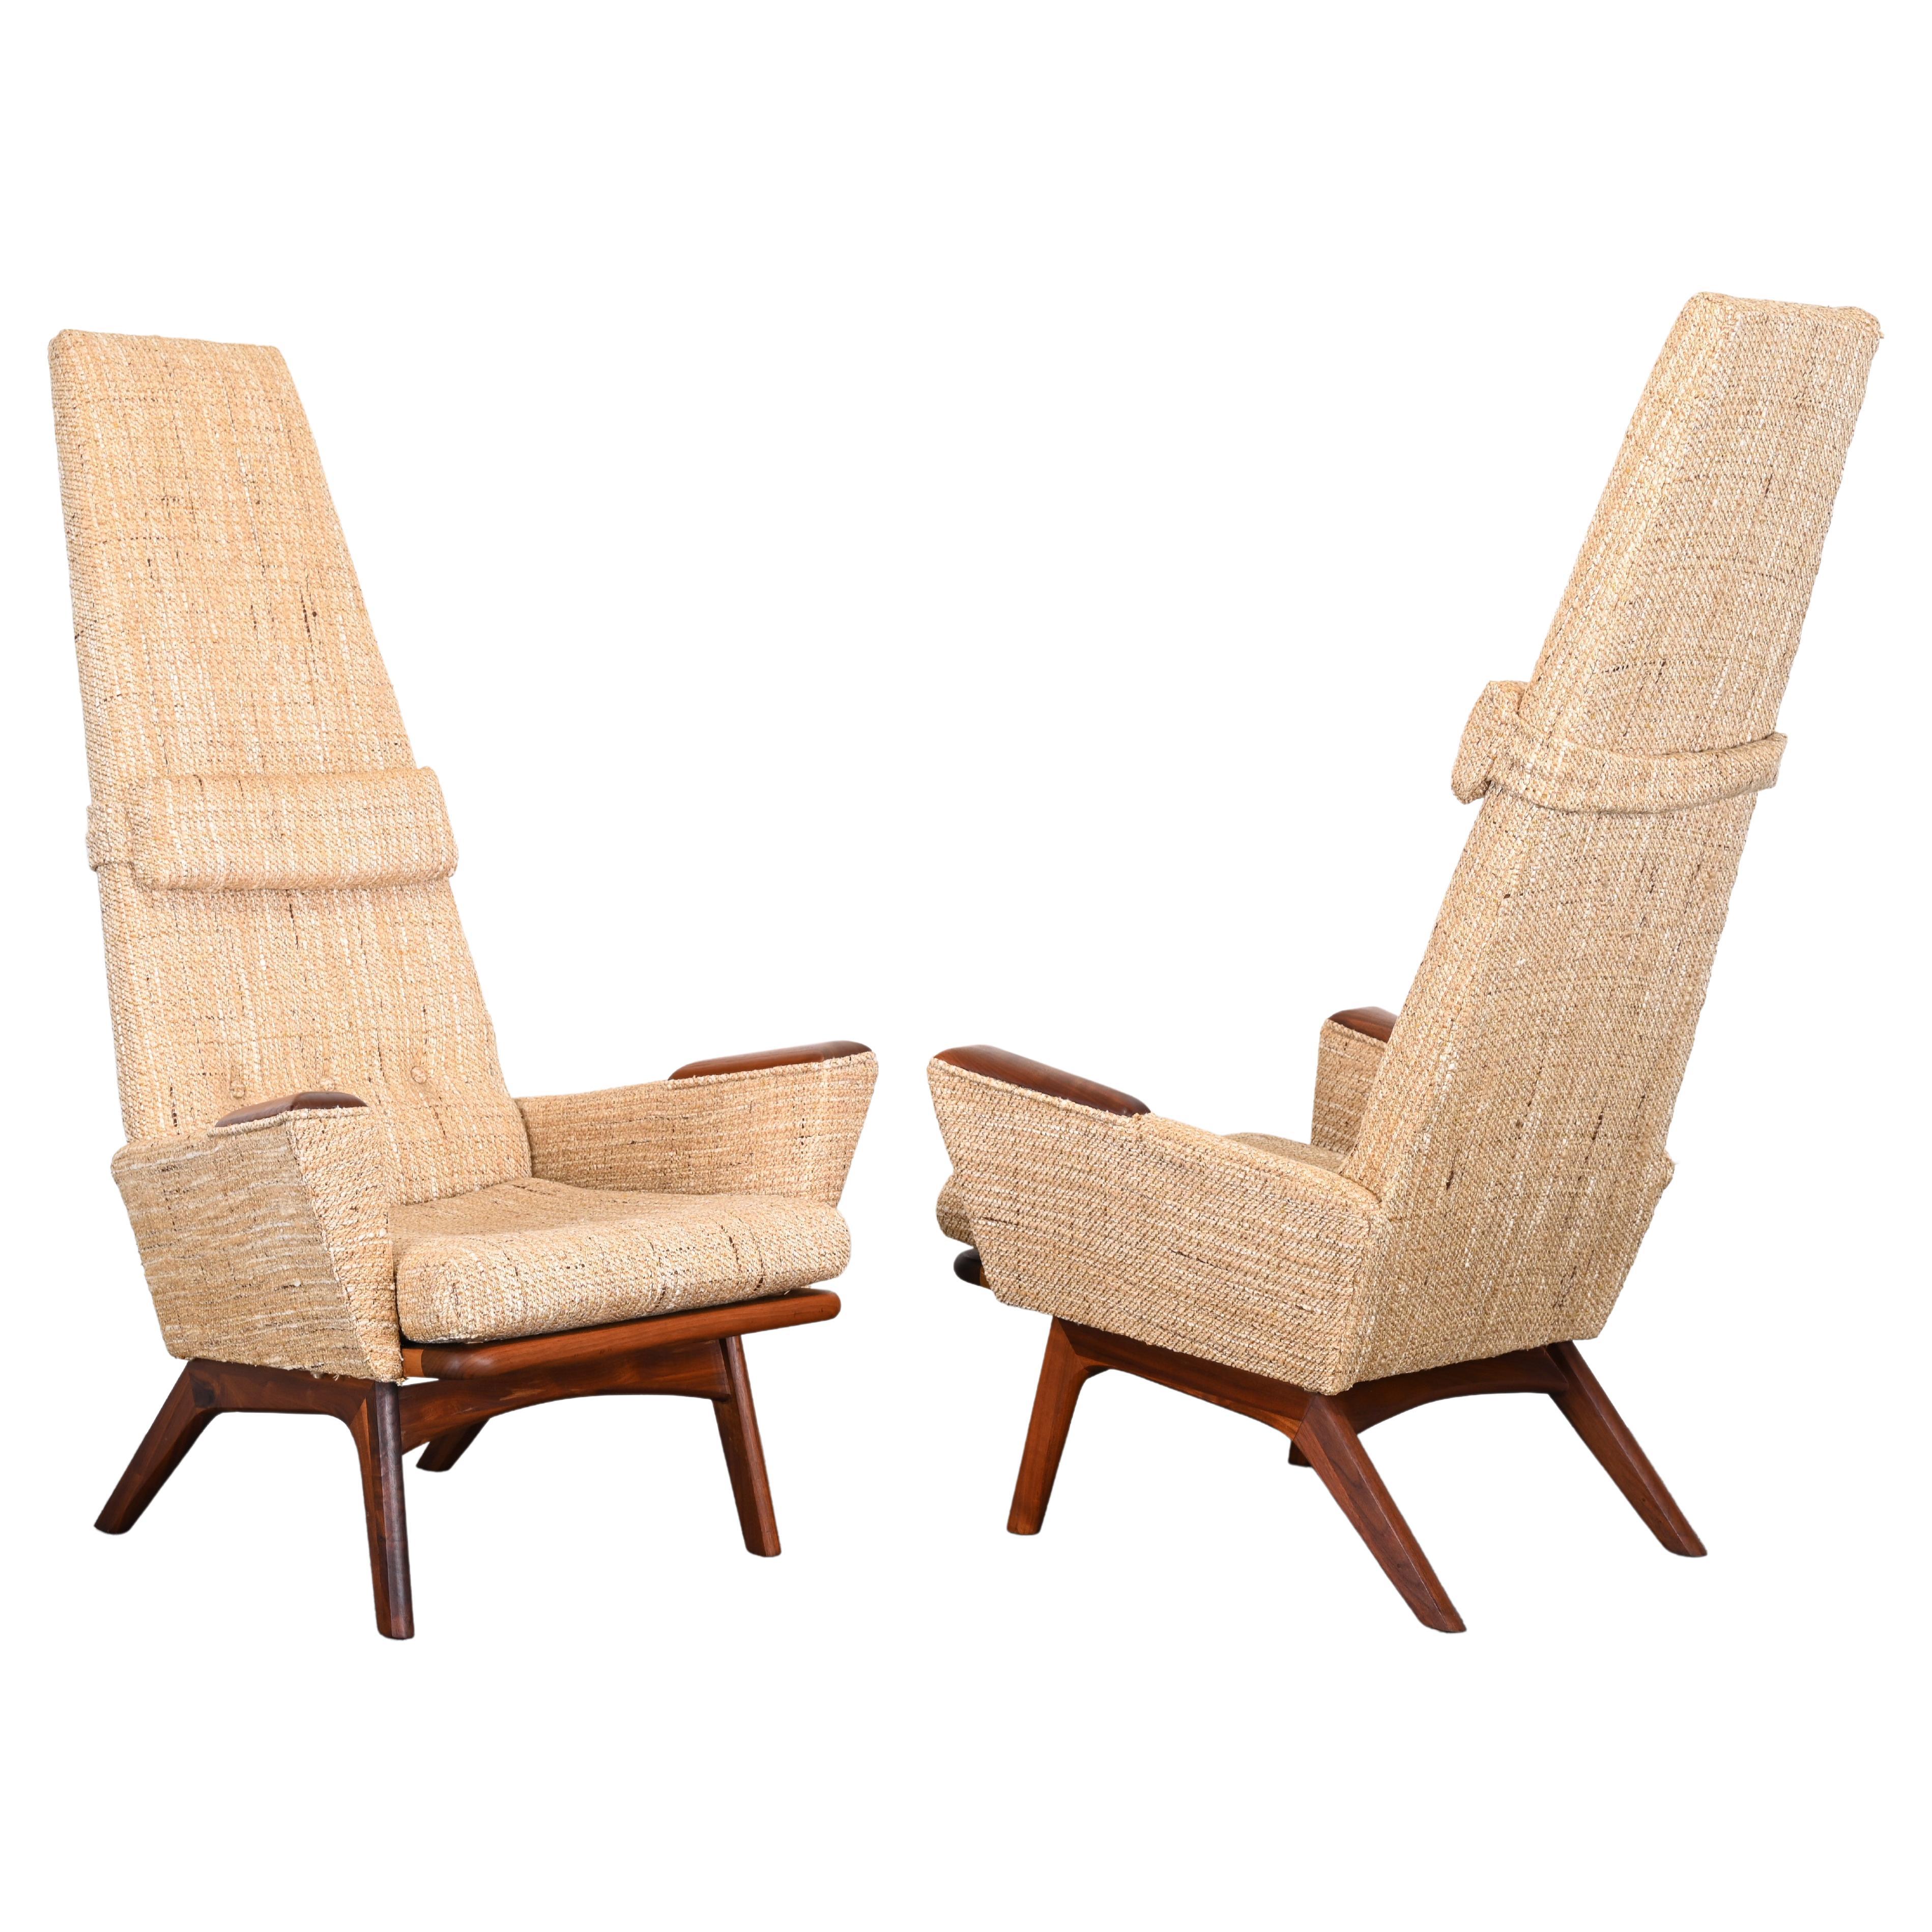 Pair of Adrian Pearsall "Slim Jim" Lounge Chairs for Craft Associates, 1960s